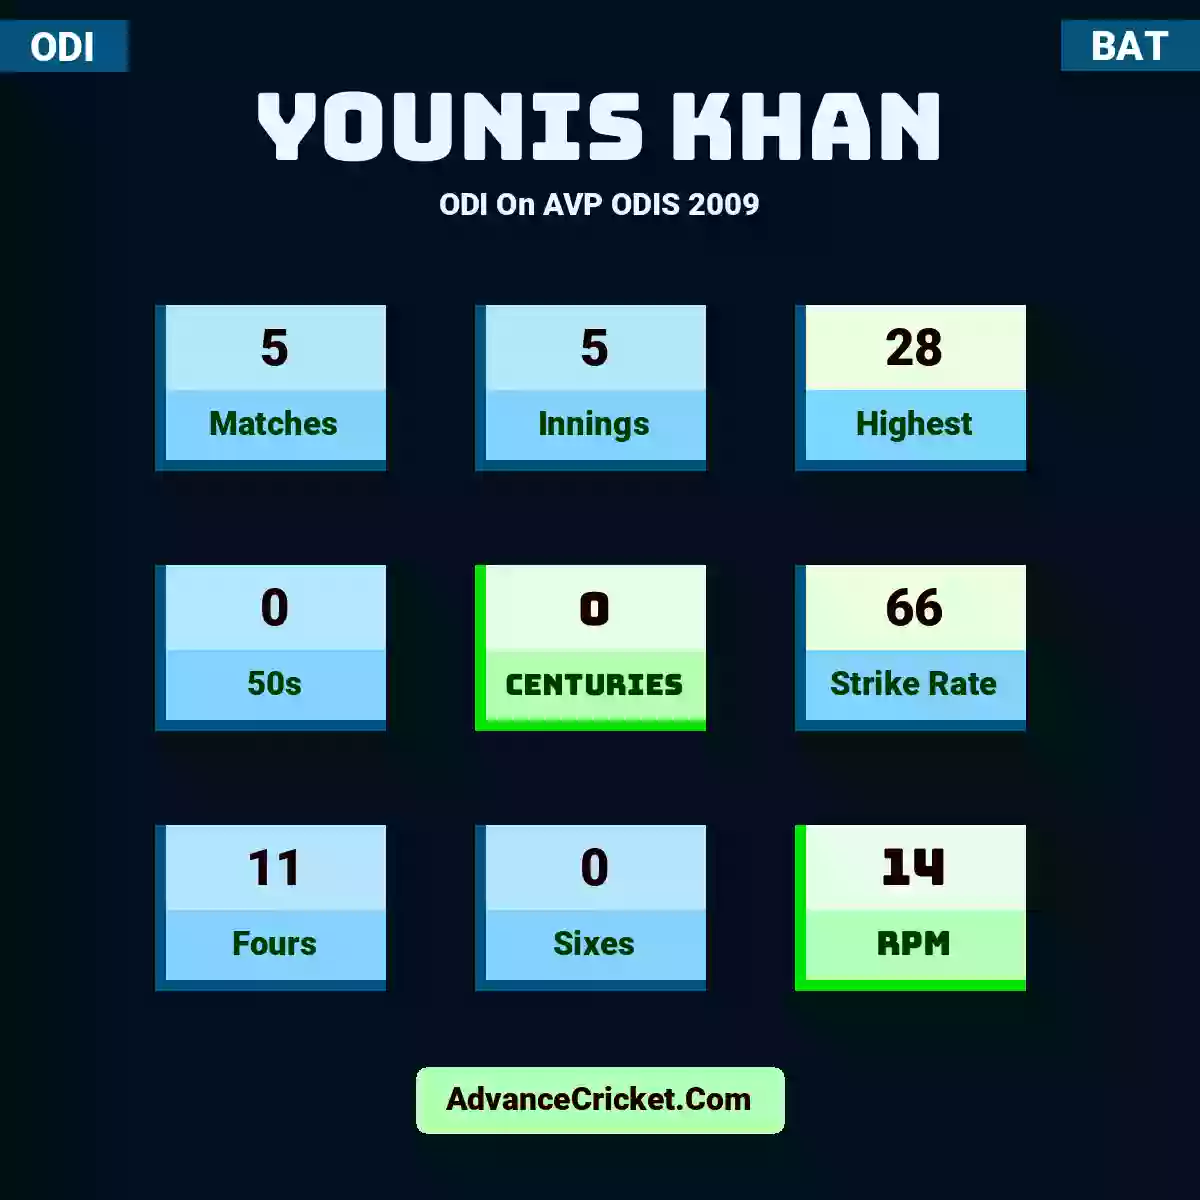 Younis Khan ODI  On AVP ODIS 2009, Younis Khan played 5 matches, scored 28 runs as highest, 0 half-centuries, and 0 centuries, with a strike rate of 66. Y.Khan hit 11 fours and 0 sixes, with an RPM of 14.